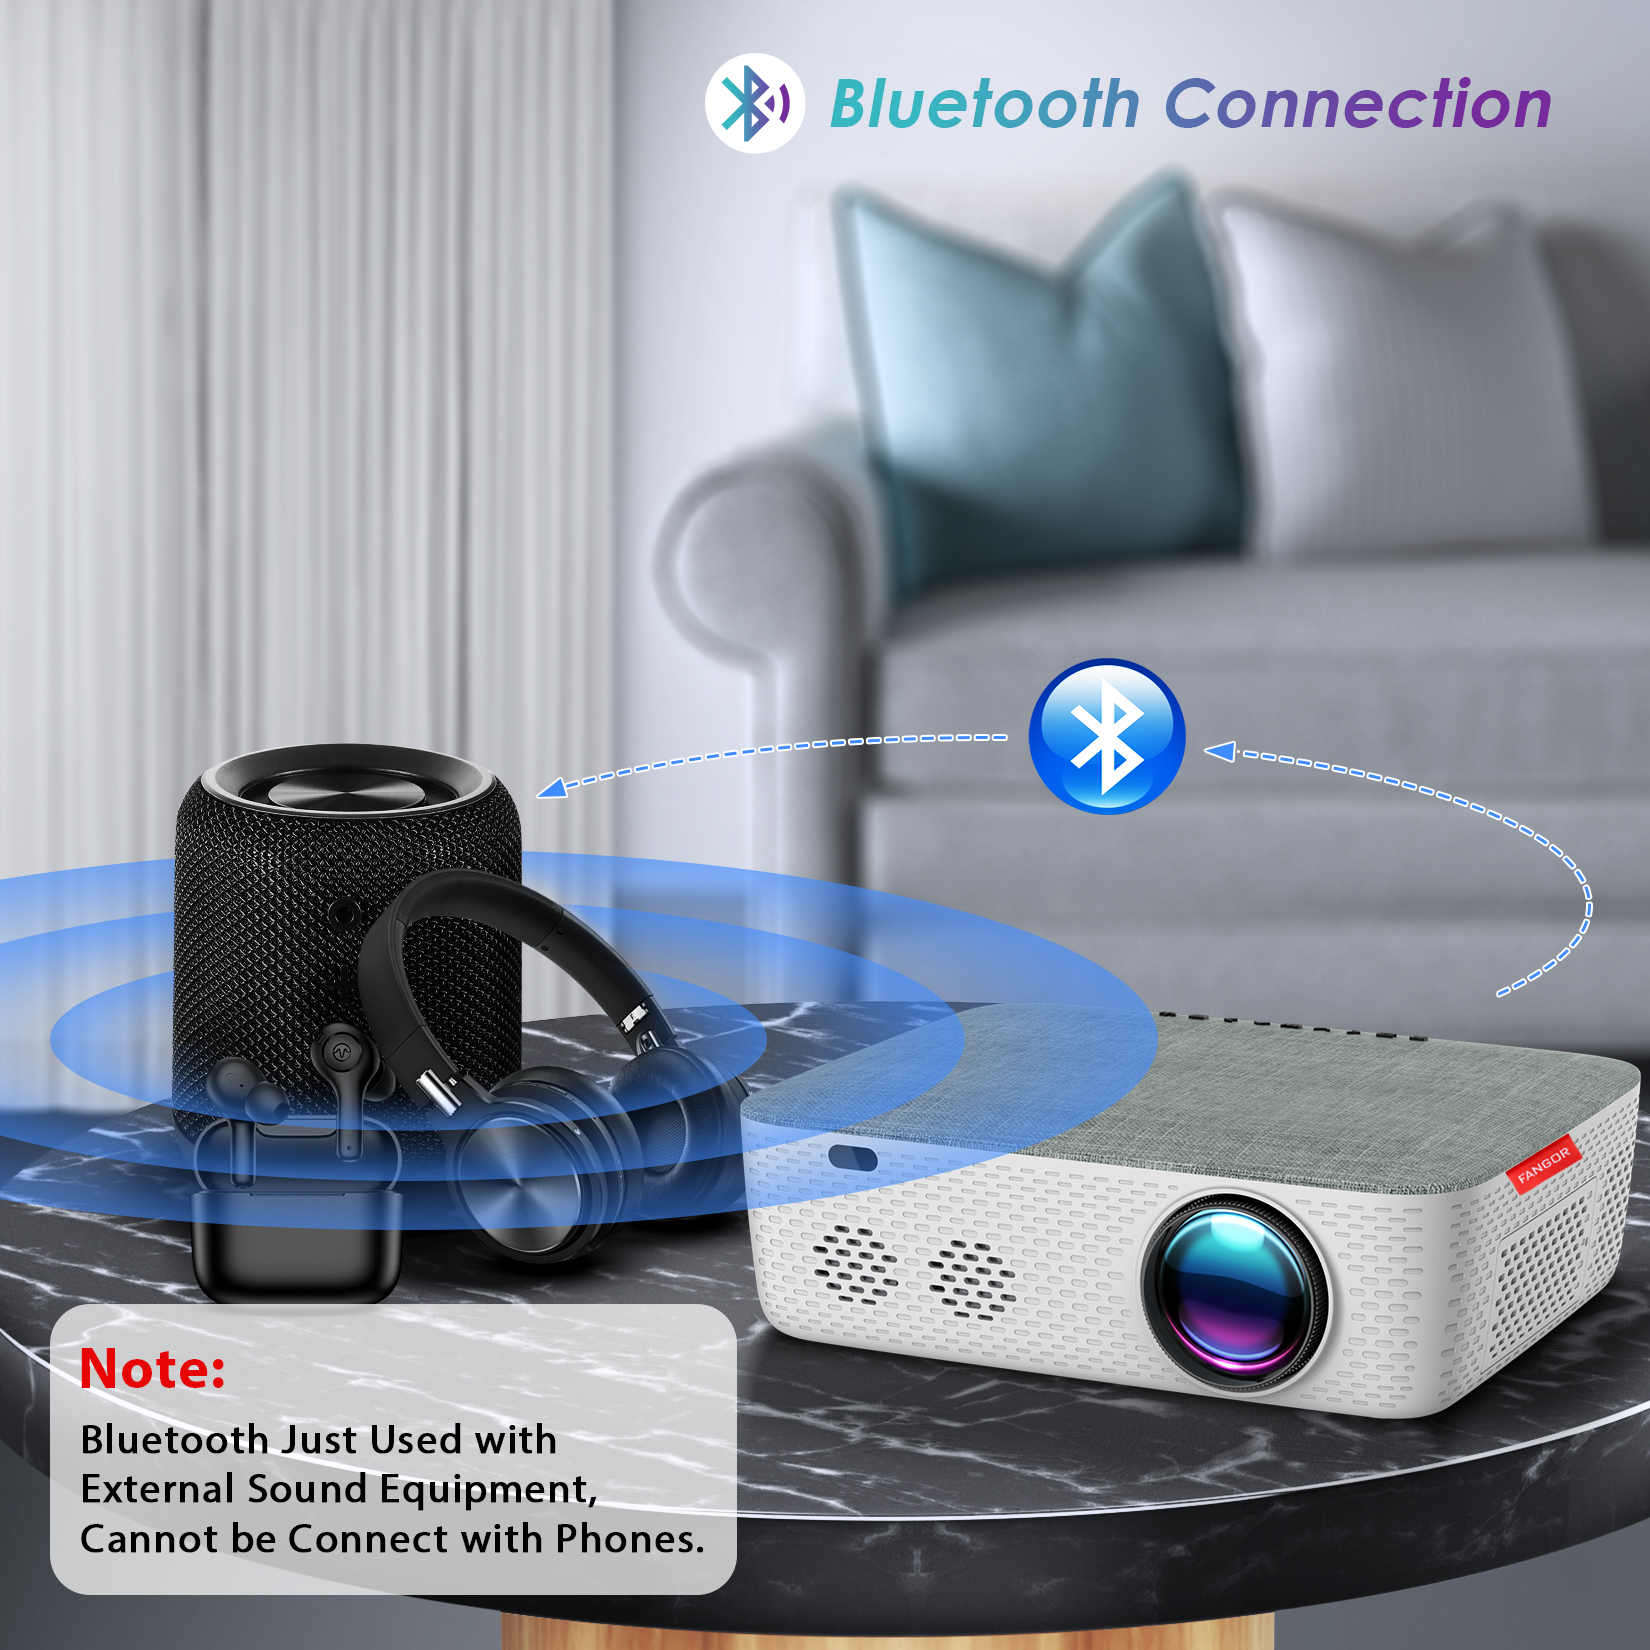 Fangor Projector with 5G WiFi and Bluetooth, 340ANSI Native 1080P Full HD Video Projector, Outdoor Movie Projector Support 4K ,Digital Keystone/50% Zoom,Compatible with HDMI, USB, iOS/Android Phone - image 2 of 8